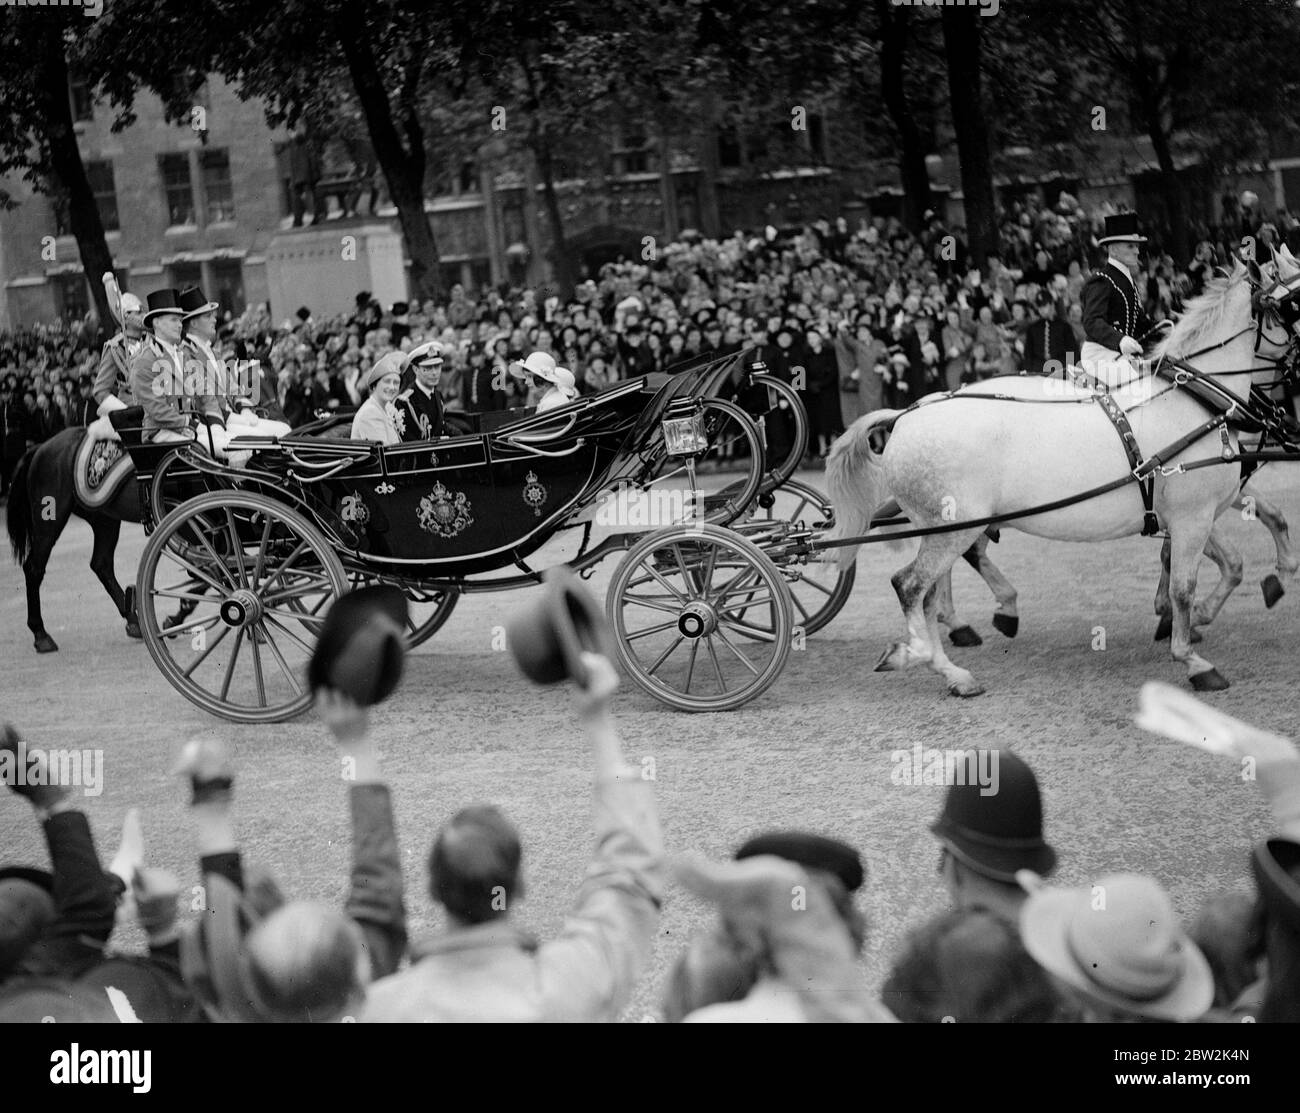 The Royal tour of Canada and the USA by King George VI and Queen Elizabeth , 1939 The King and Queen and the Princesses Elizabeth and Margaret Rose receive a remarkable ovation as they drive through Parliament Square on their return to Britain Stock Photo